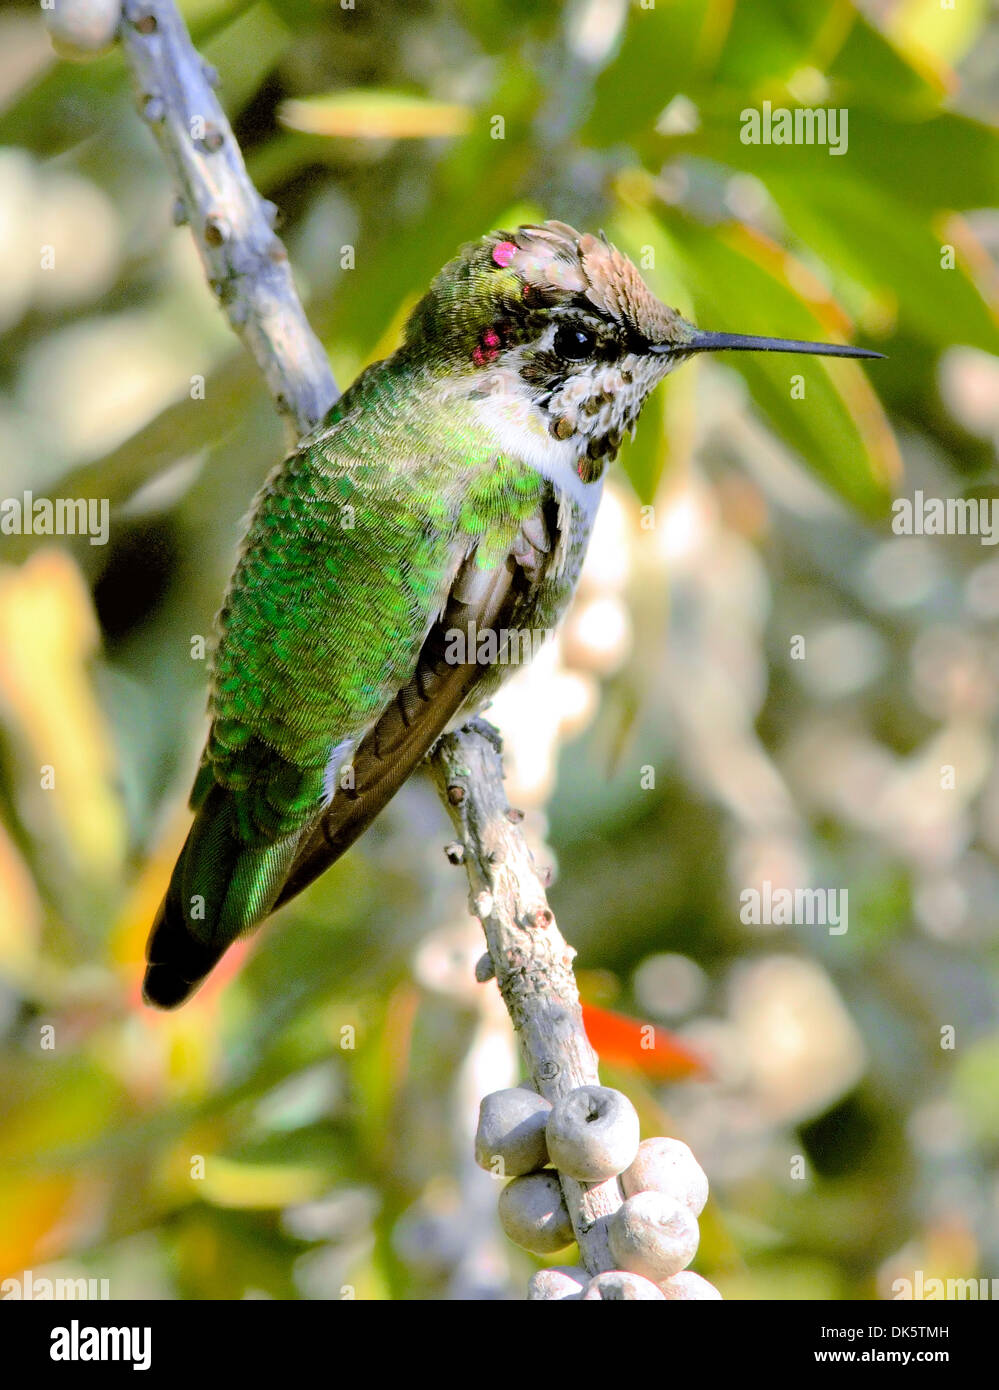 An Anna's Hummingbird  bird- Calypte anna, perched on a branch, pictured against a blurred background Stock Photo